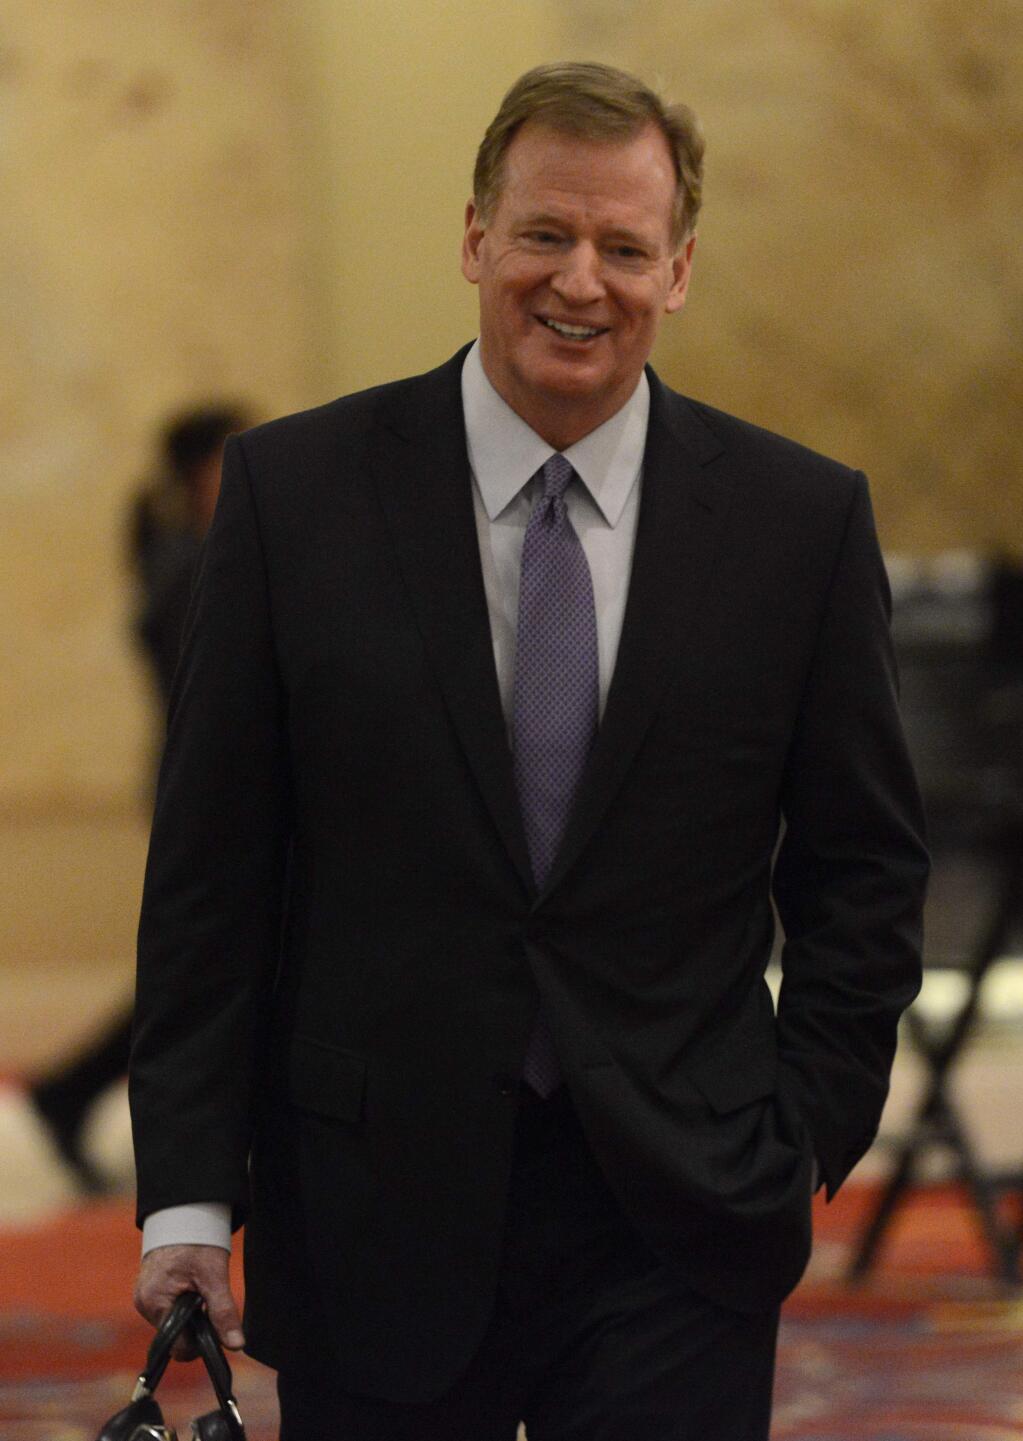 NFL commissioner Roger Goodell arrives before an NFL football owners meeting Tuesday, May 23, 2017, in Chicago. (AP Photo/Paul Beaty)